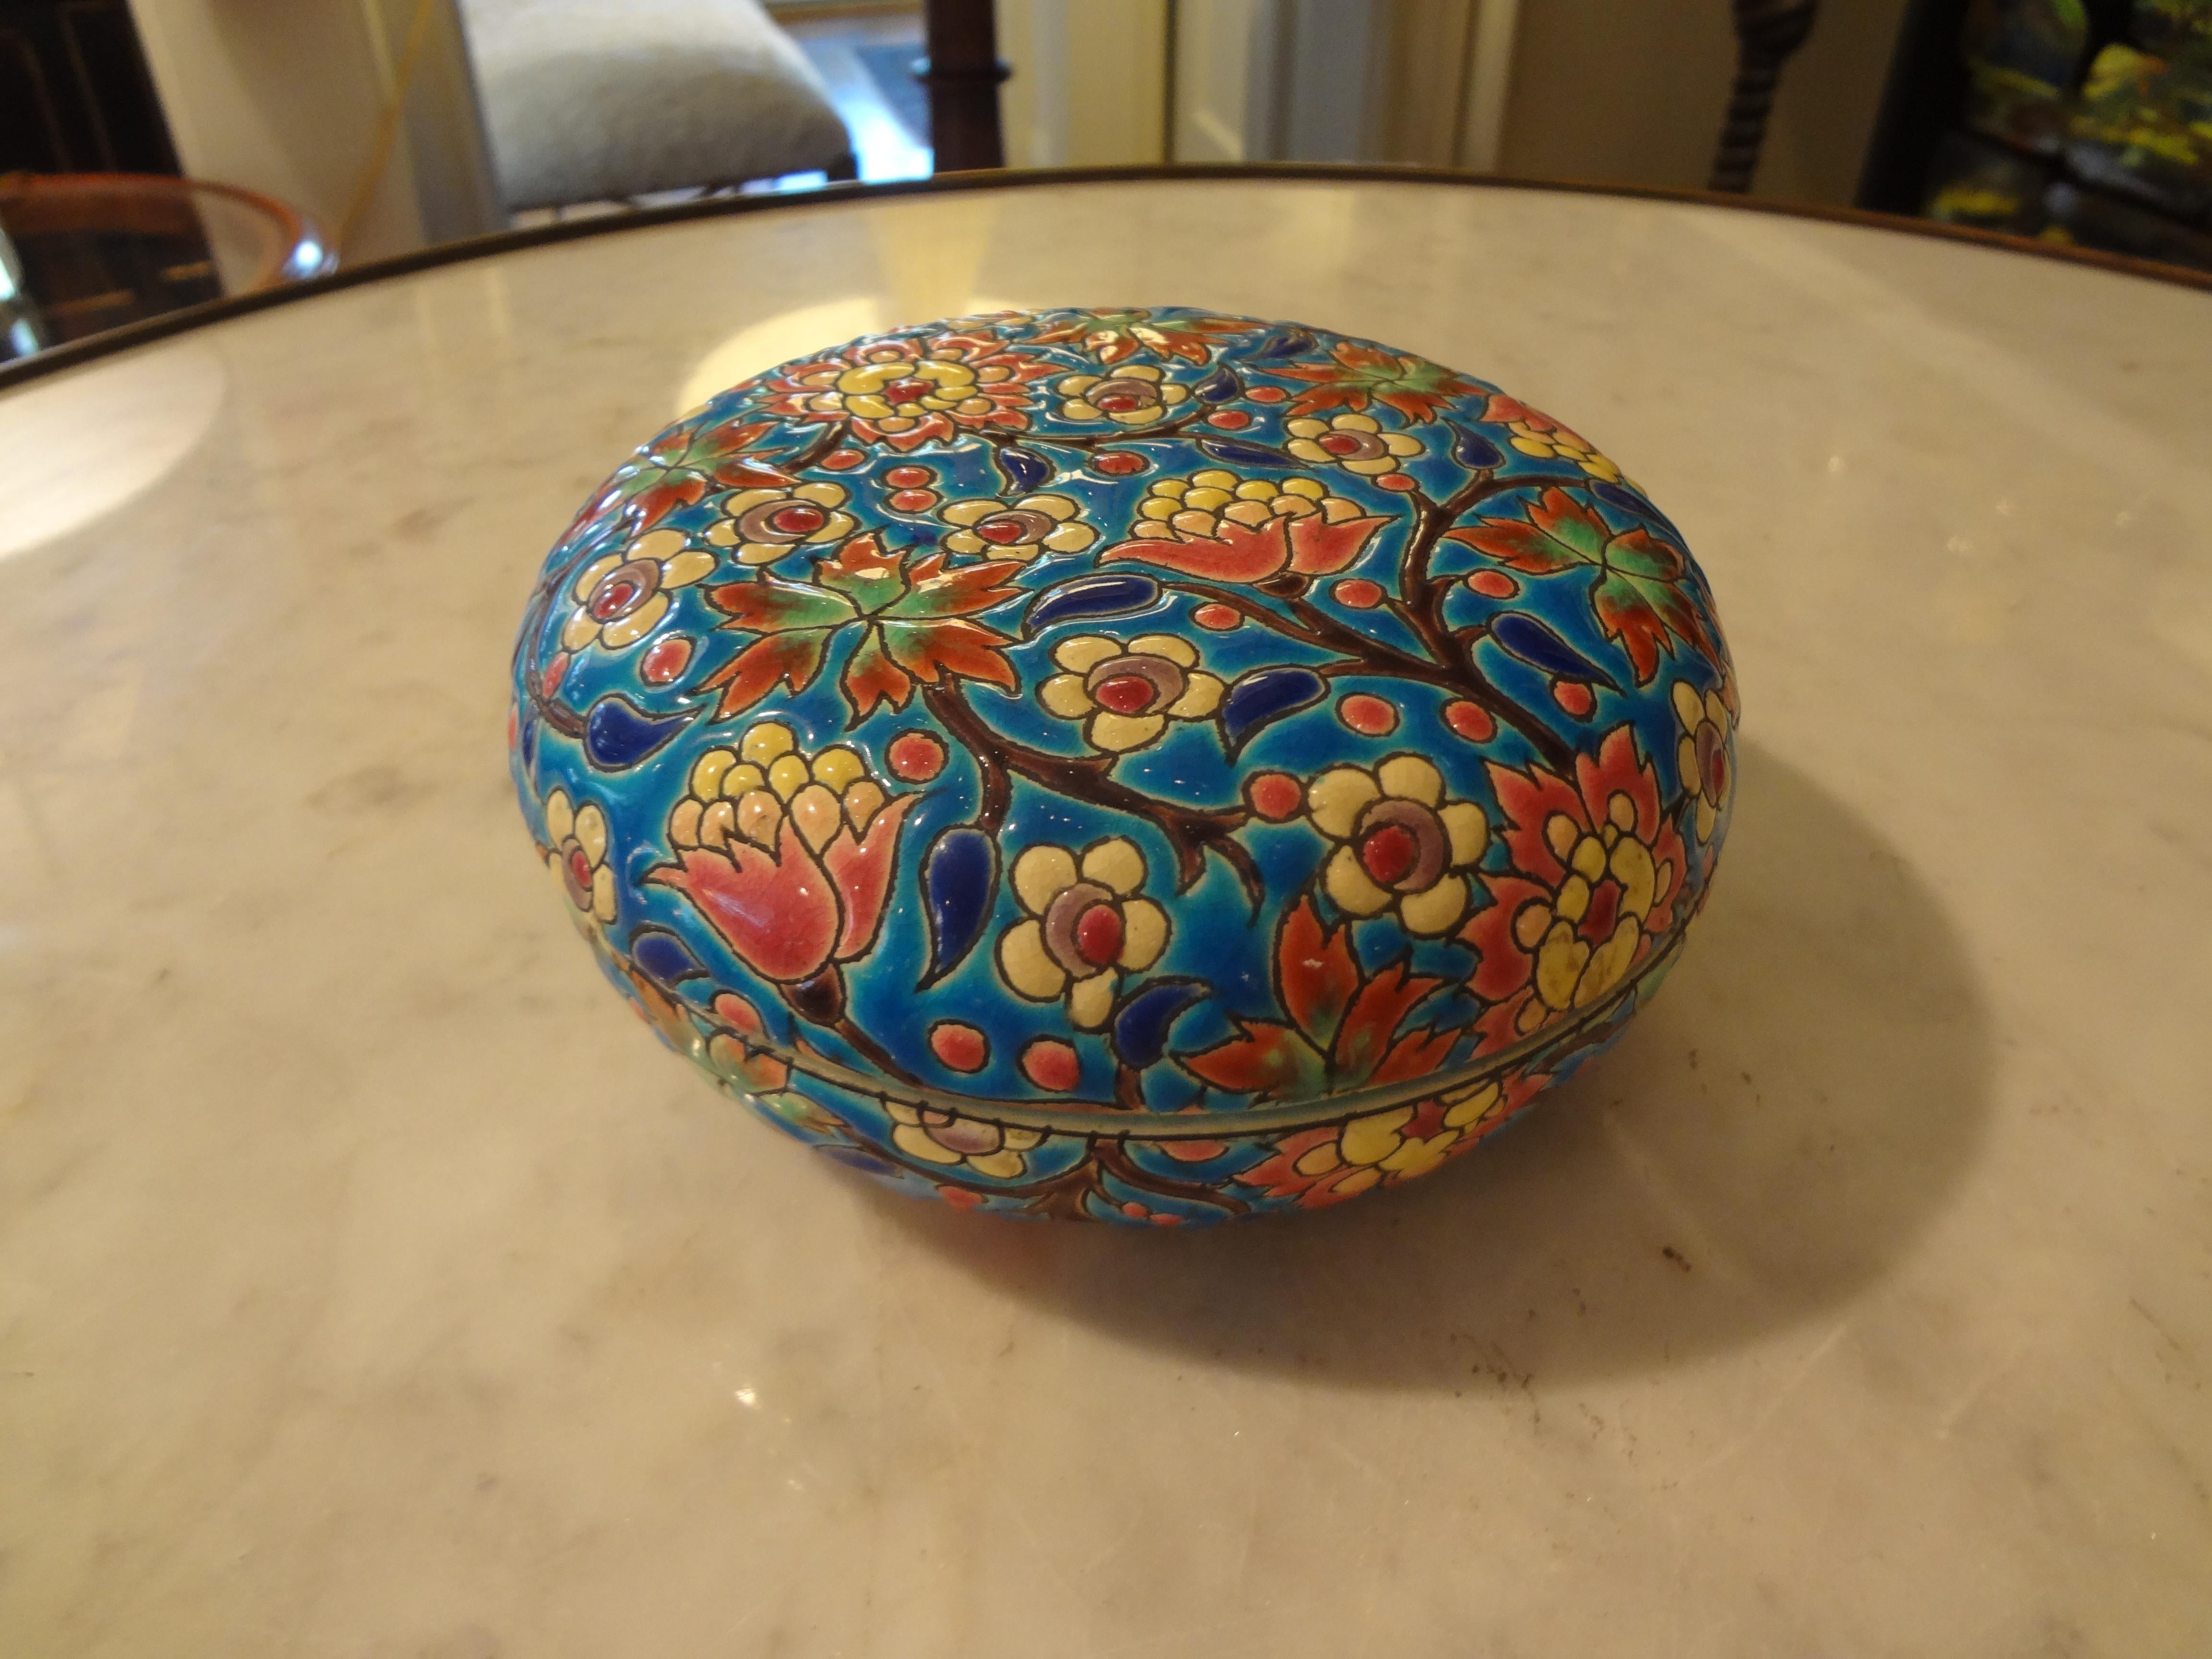 French faience round decorative box or trinket box from the Emaux de Longwy art pottery workshop in France. This porcelain box is hand-decorated with a colorful enameled glaze in a cloisonné style chinoiserie design. The decoration consists of